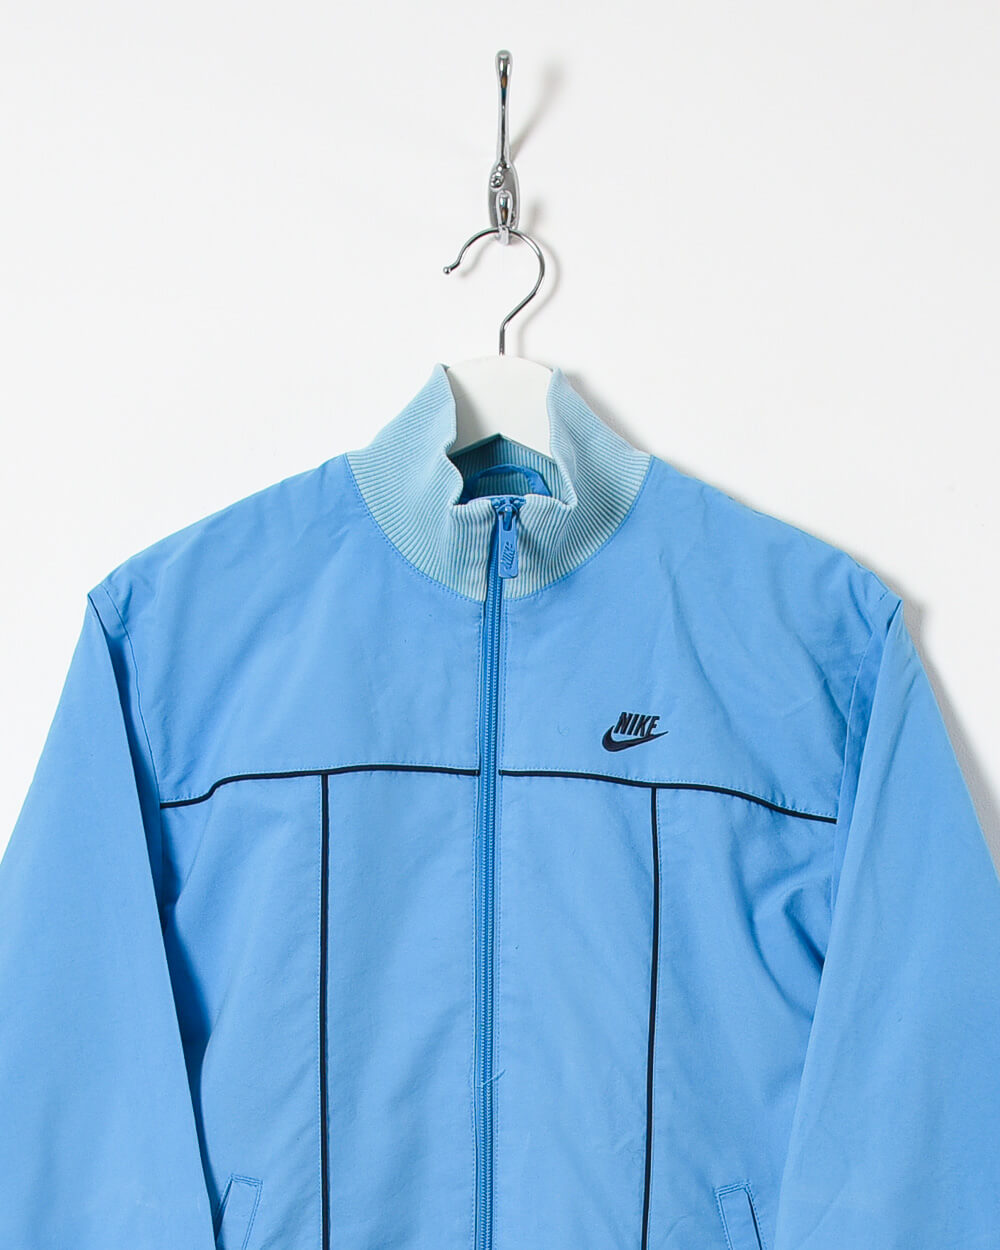 Nike Women's Tracksuit Top - Large - Domno Vintage 90s, 80s, 00s Retro and Vintage Clothing 